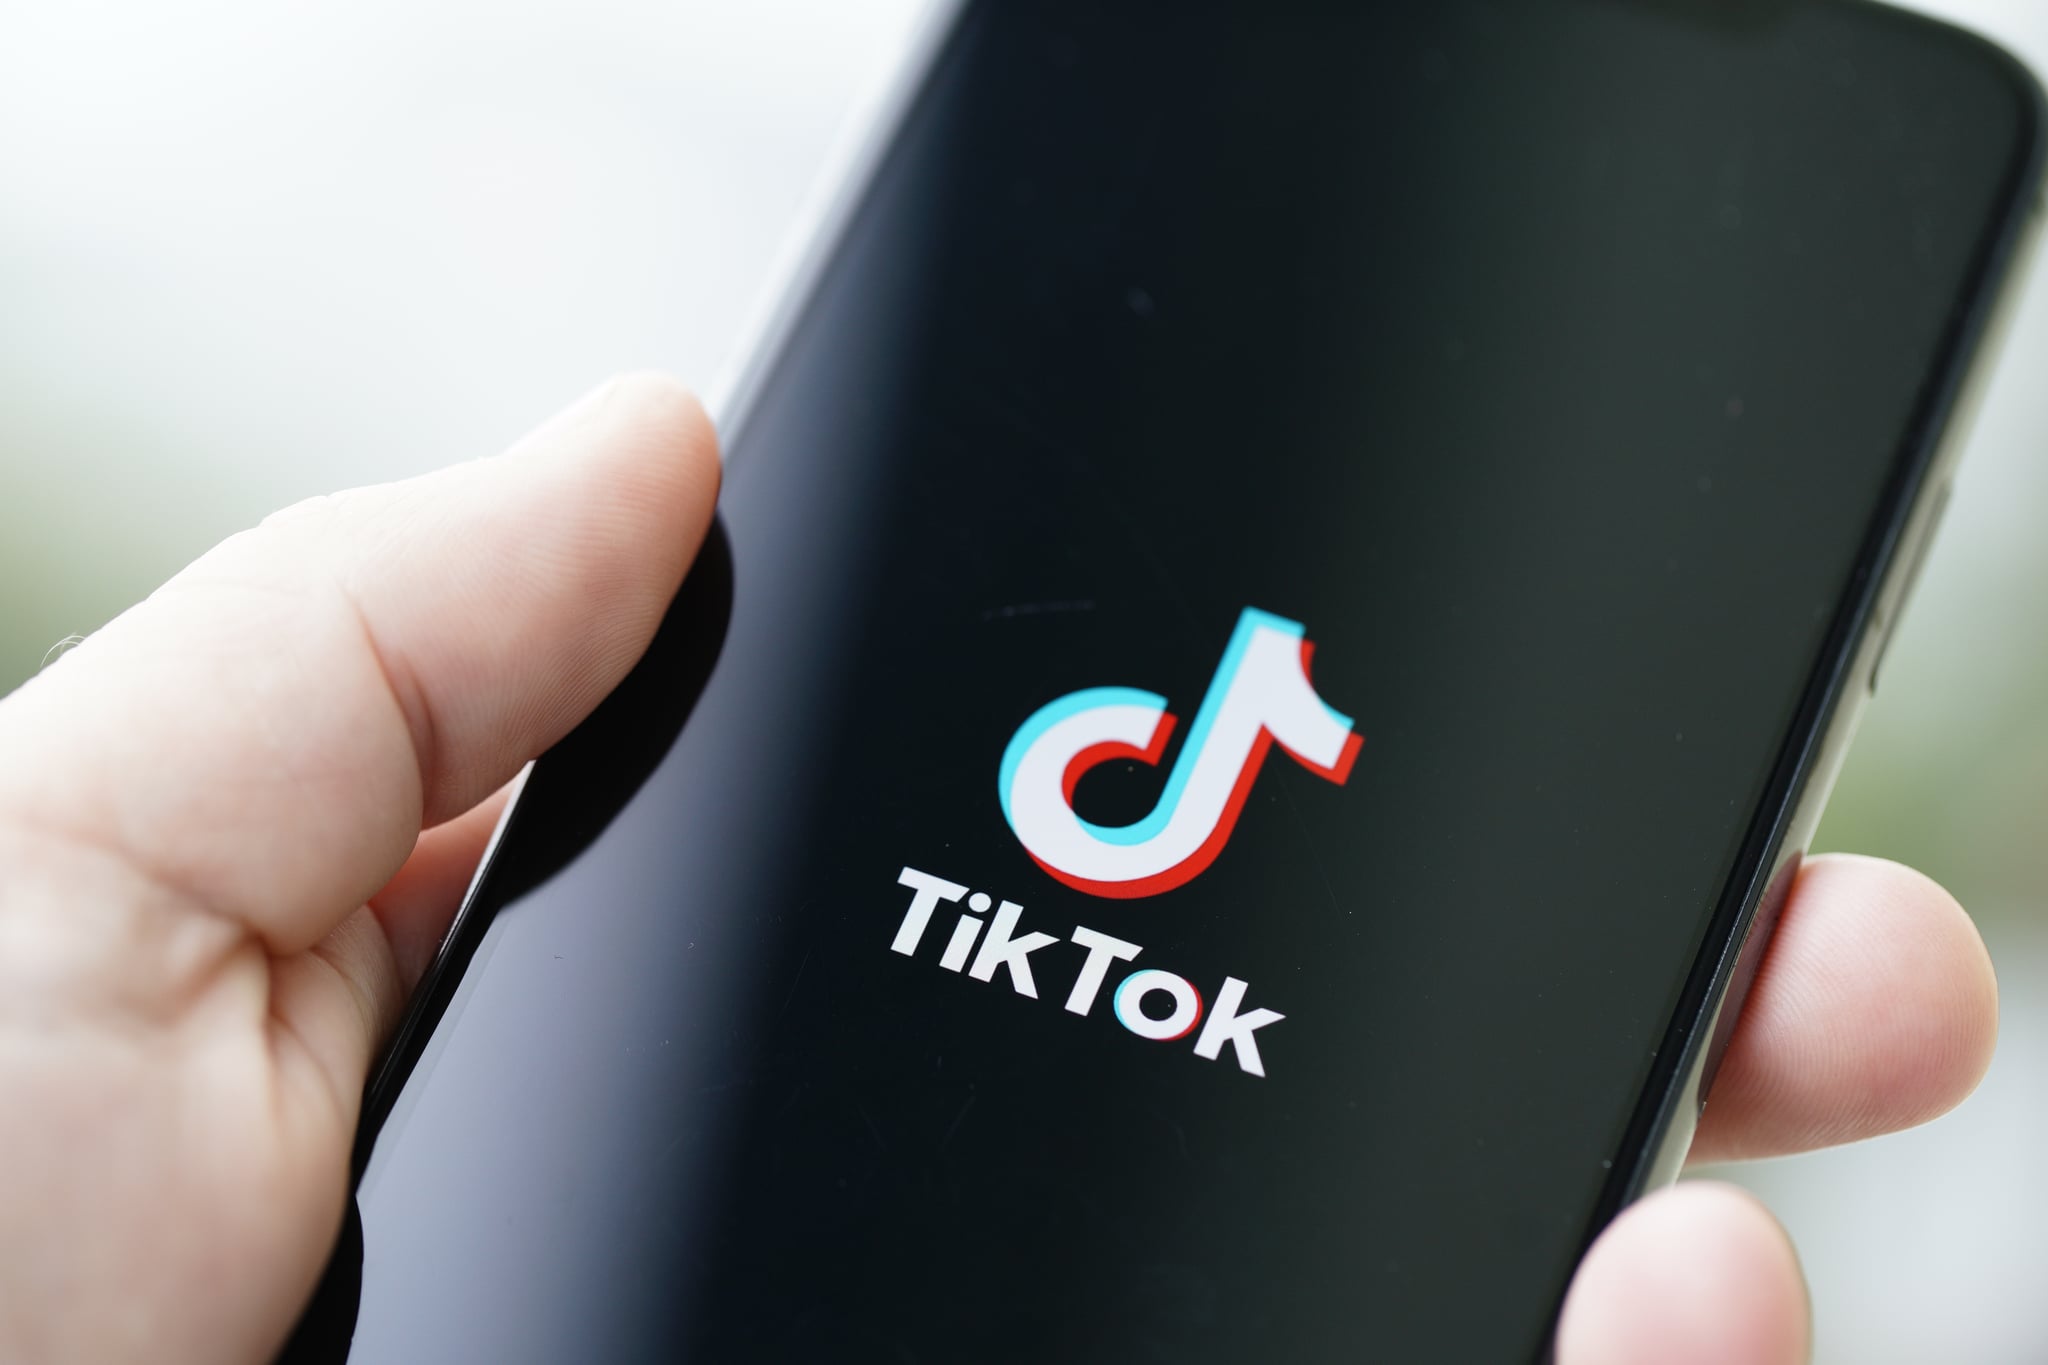 The TikTok logo is seen on an iPhone 11 Pro max in this photo illustration in Warsaw, Poland on September 29, 2020. The TikTok app will be banned from US app stores from Sunday unless president Donald Trump approves a last-minute deal between US tech firm Oracle and TikTok owner ByteDance. US authorities say the Chinese video sharing app threaten national security and could pass on user data to China. (Photo by Jaap Arriens/NurPhoto via Getty Images)